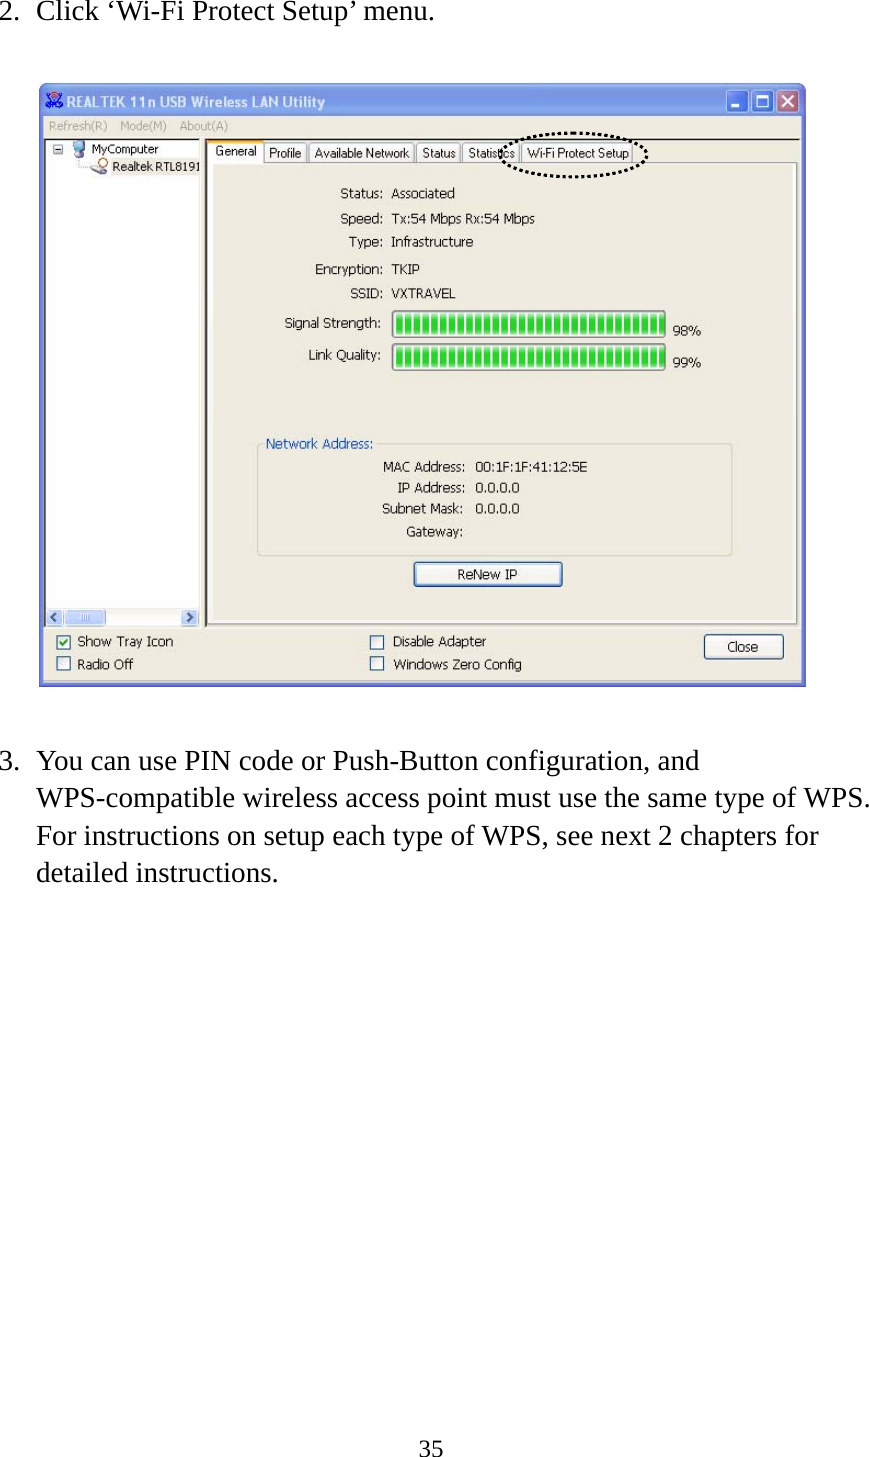 35  2. Click ‘Wi-Fi Protect Setup’ menu.    3. You can use PIN code or Push-Button configuration, and WPS-compatible wireless access point must use the same type of WPS. For instructions on setup each type of WPS, see next 2 chapters for detailed instructions.  